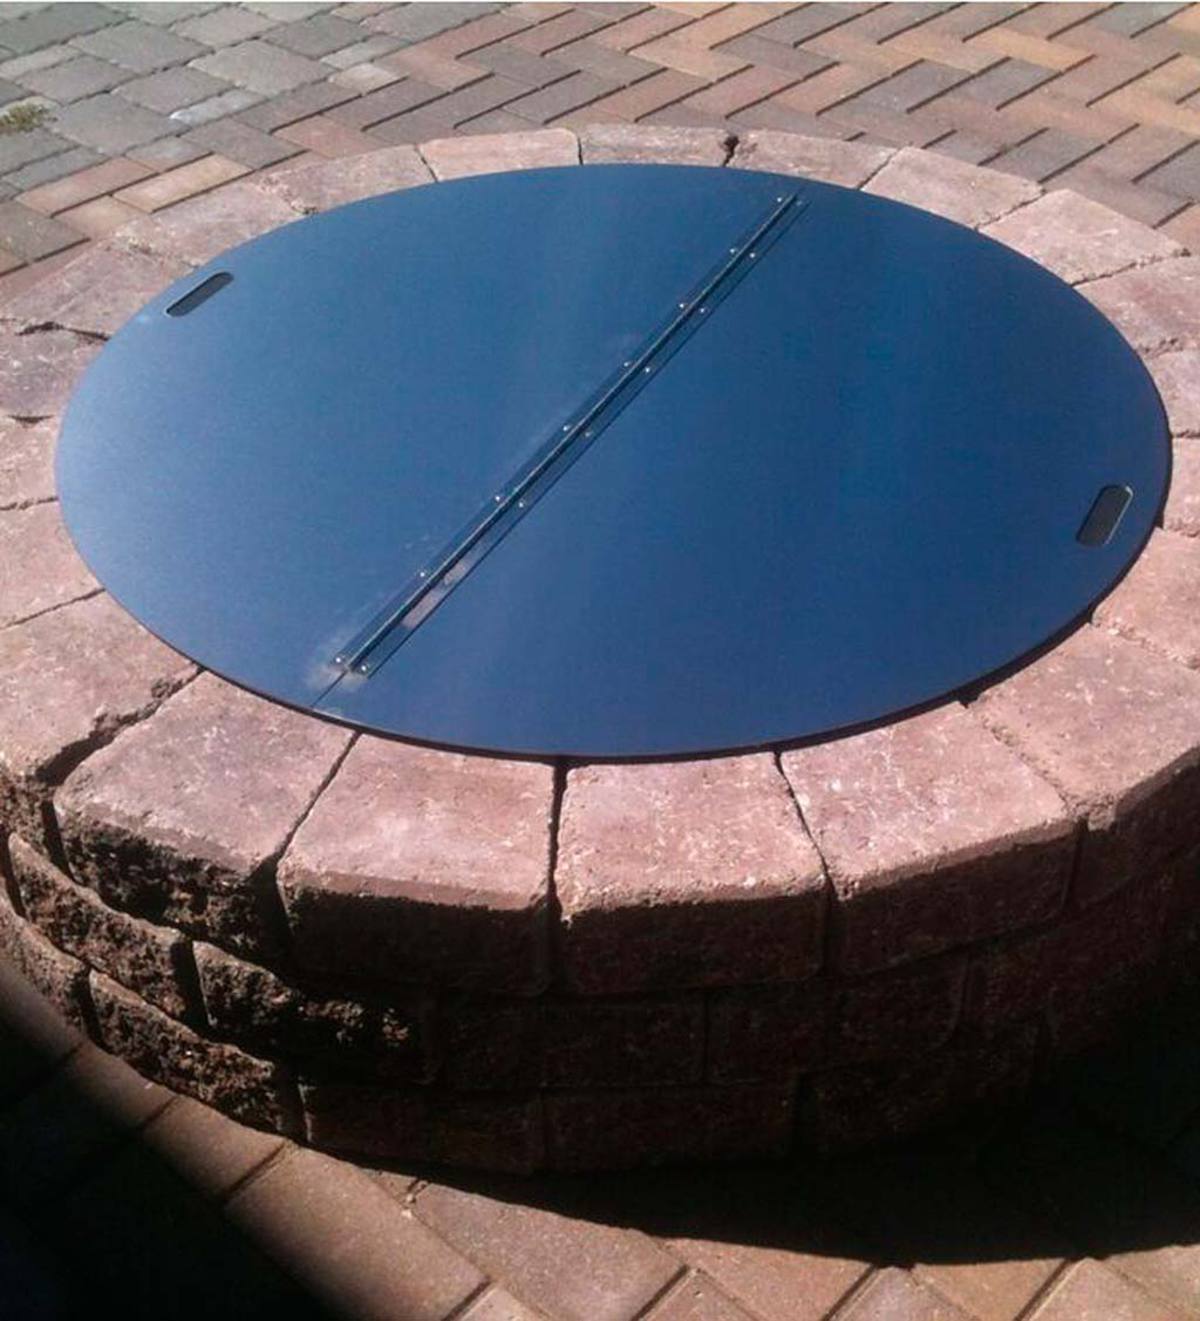 Stainless Steel Round Fire Pit Cover, Fire Pit Cover 60 Inch Diameter